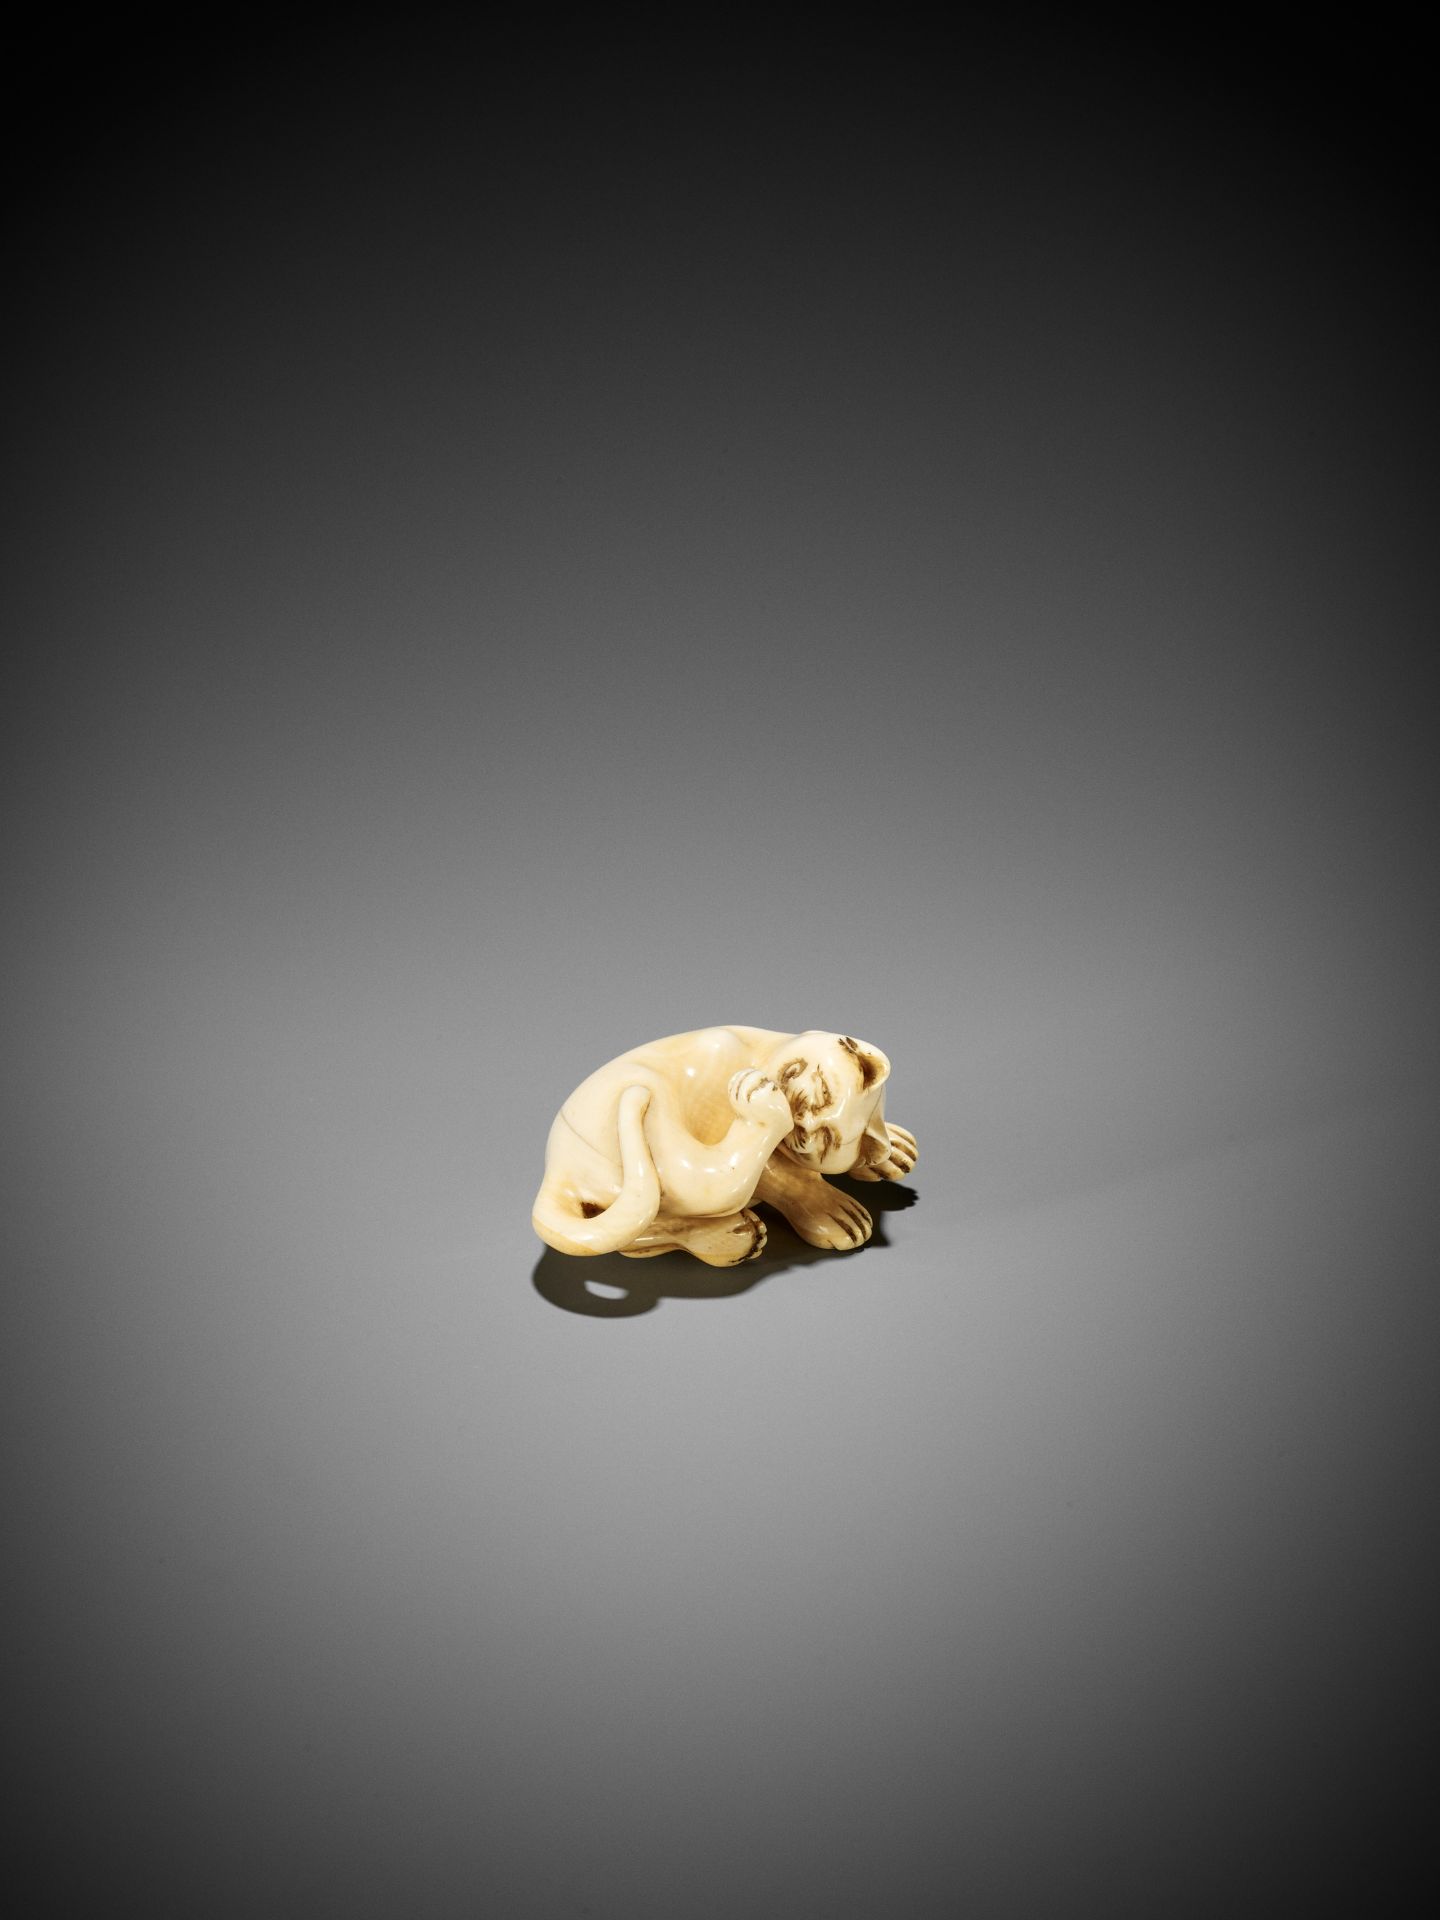 AN IVORY NETSUKE OF A CAT GROOMING ITSELF - Image 4 of 9